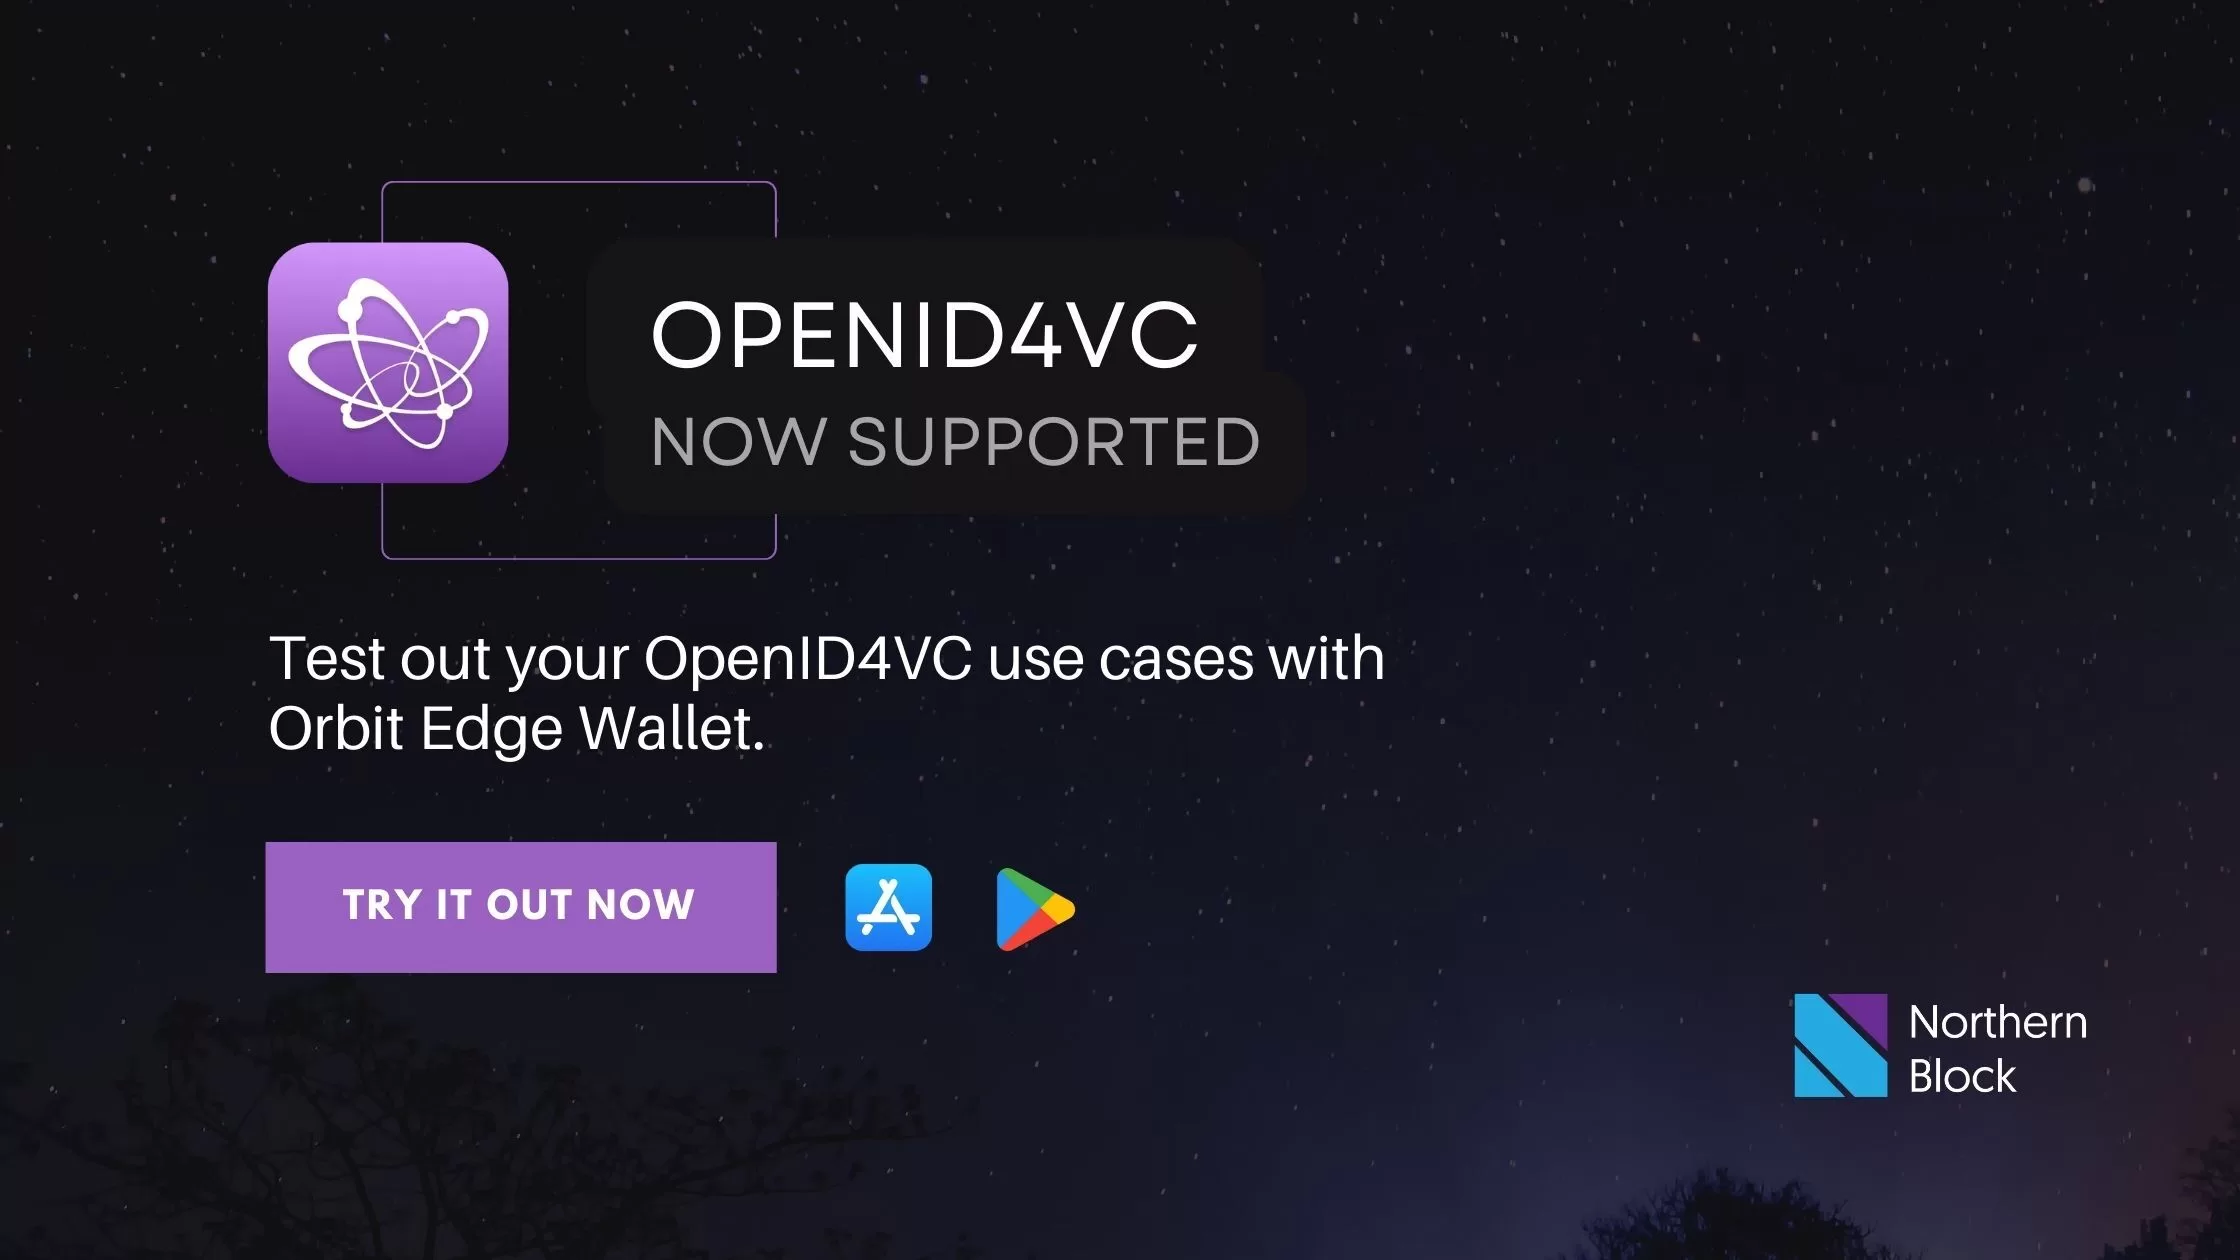 Interoperability Update: Addition of OpenID4VC to Northern Block Products